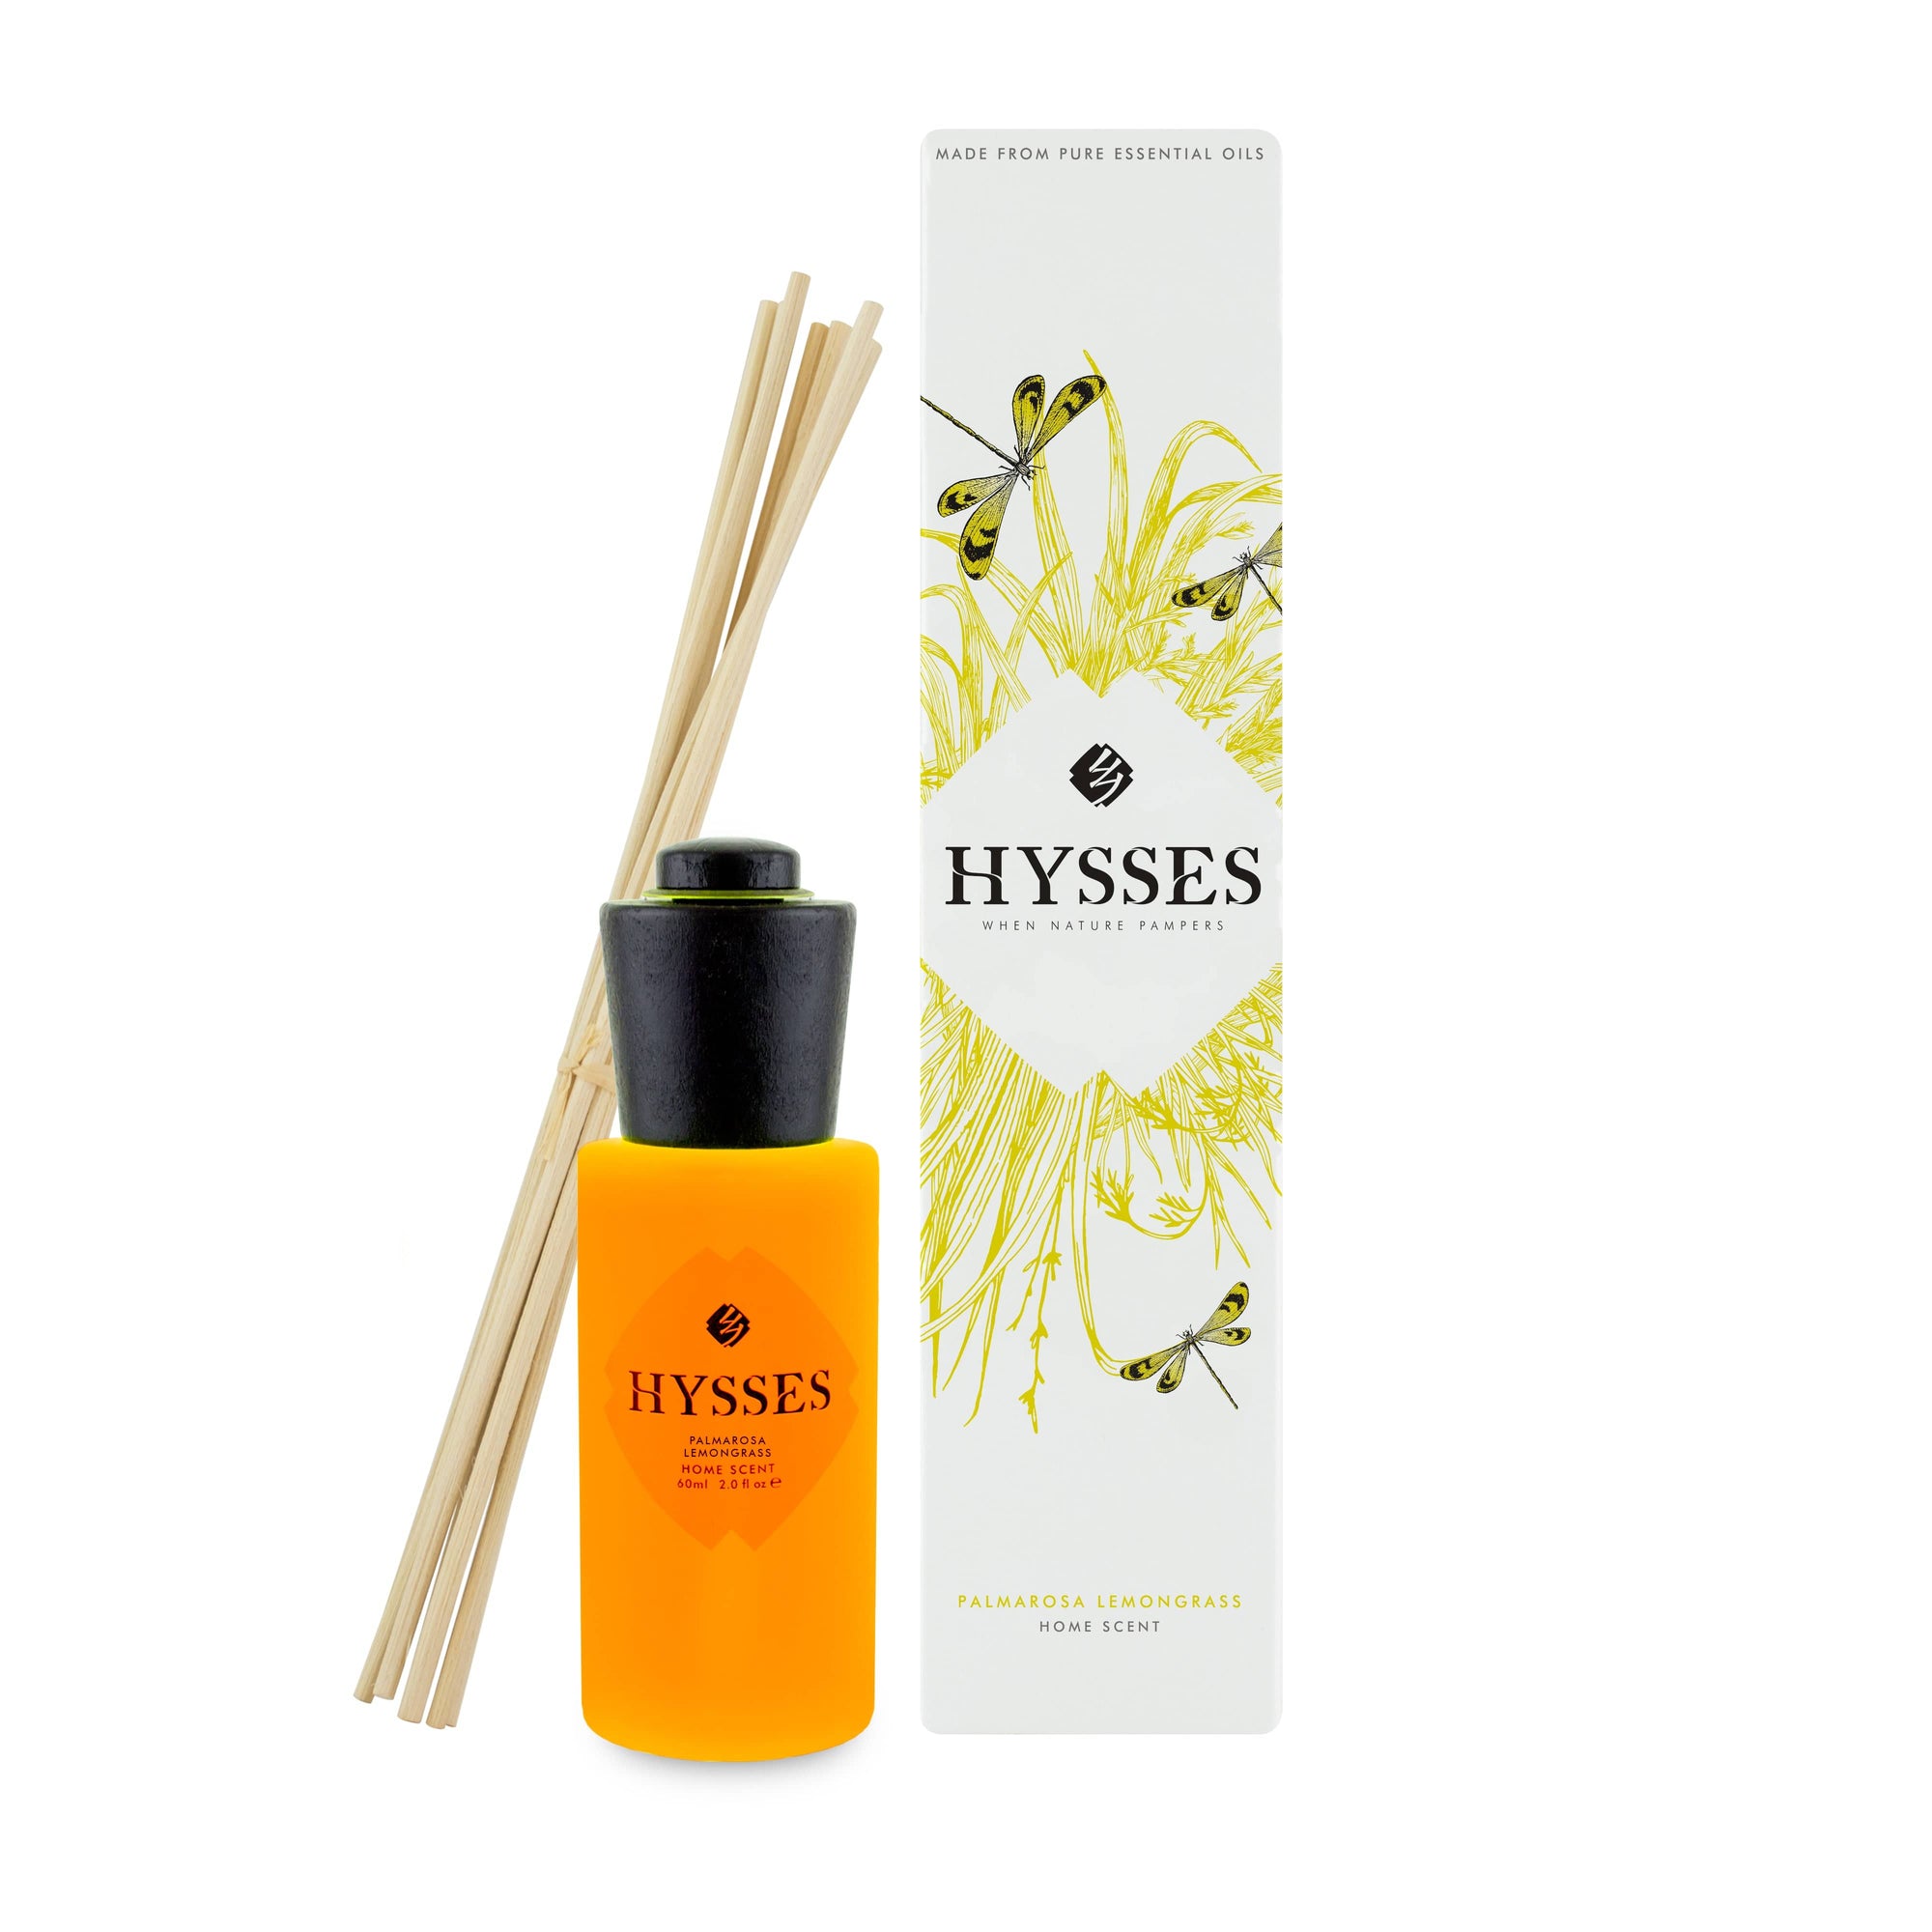 Hysses Home Scents Home Scent Reed Diffuser Palmarosa Lemongrass